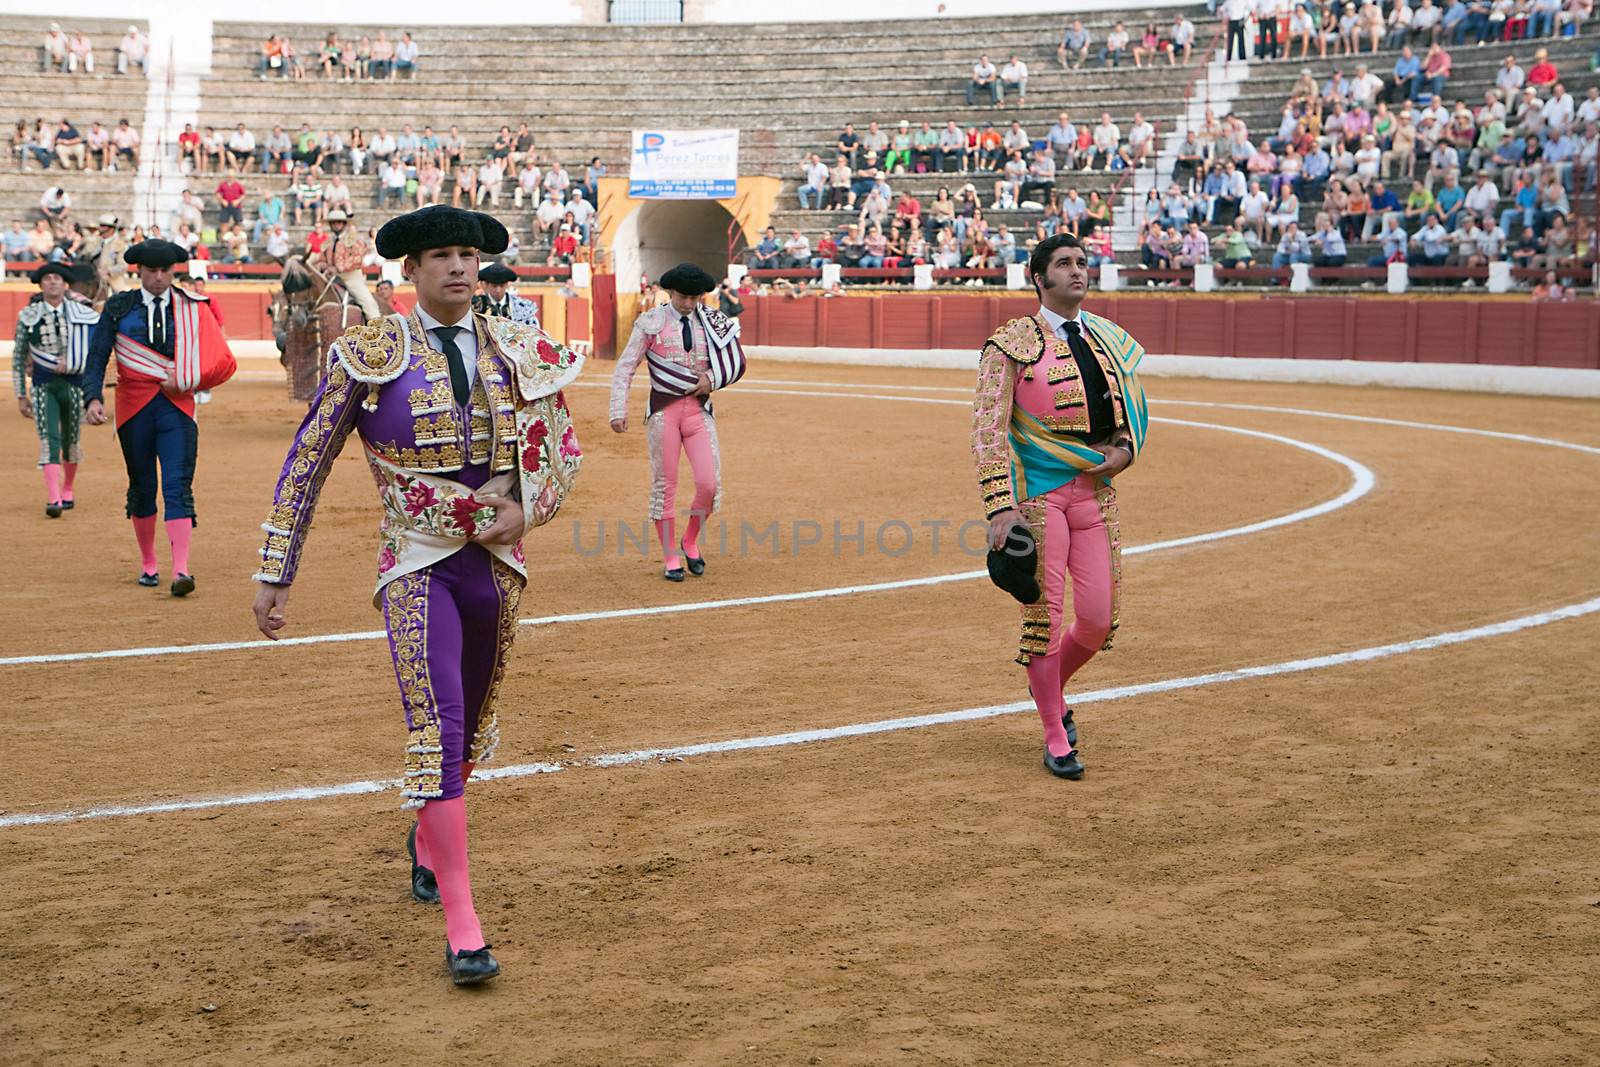 Bullfighters at the paseillo or initial parade, Andujar, Spain by digicomphoto